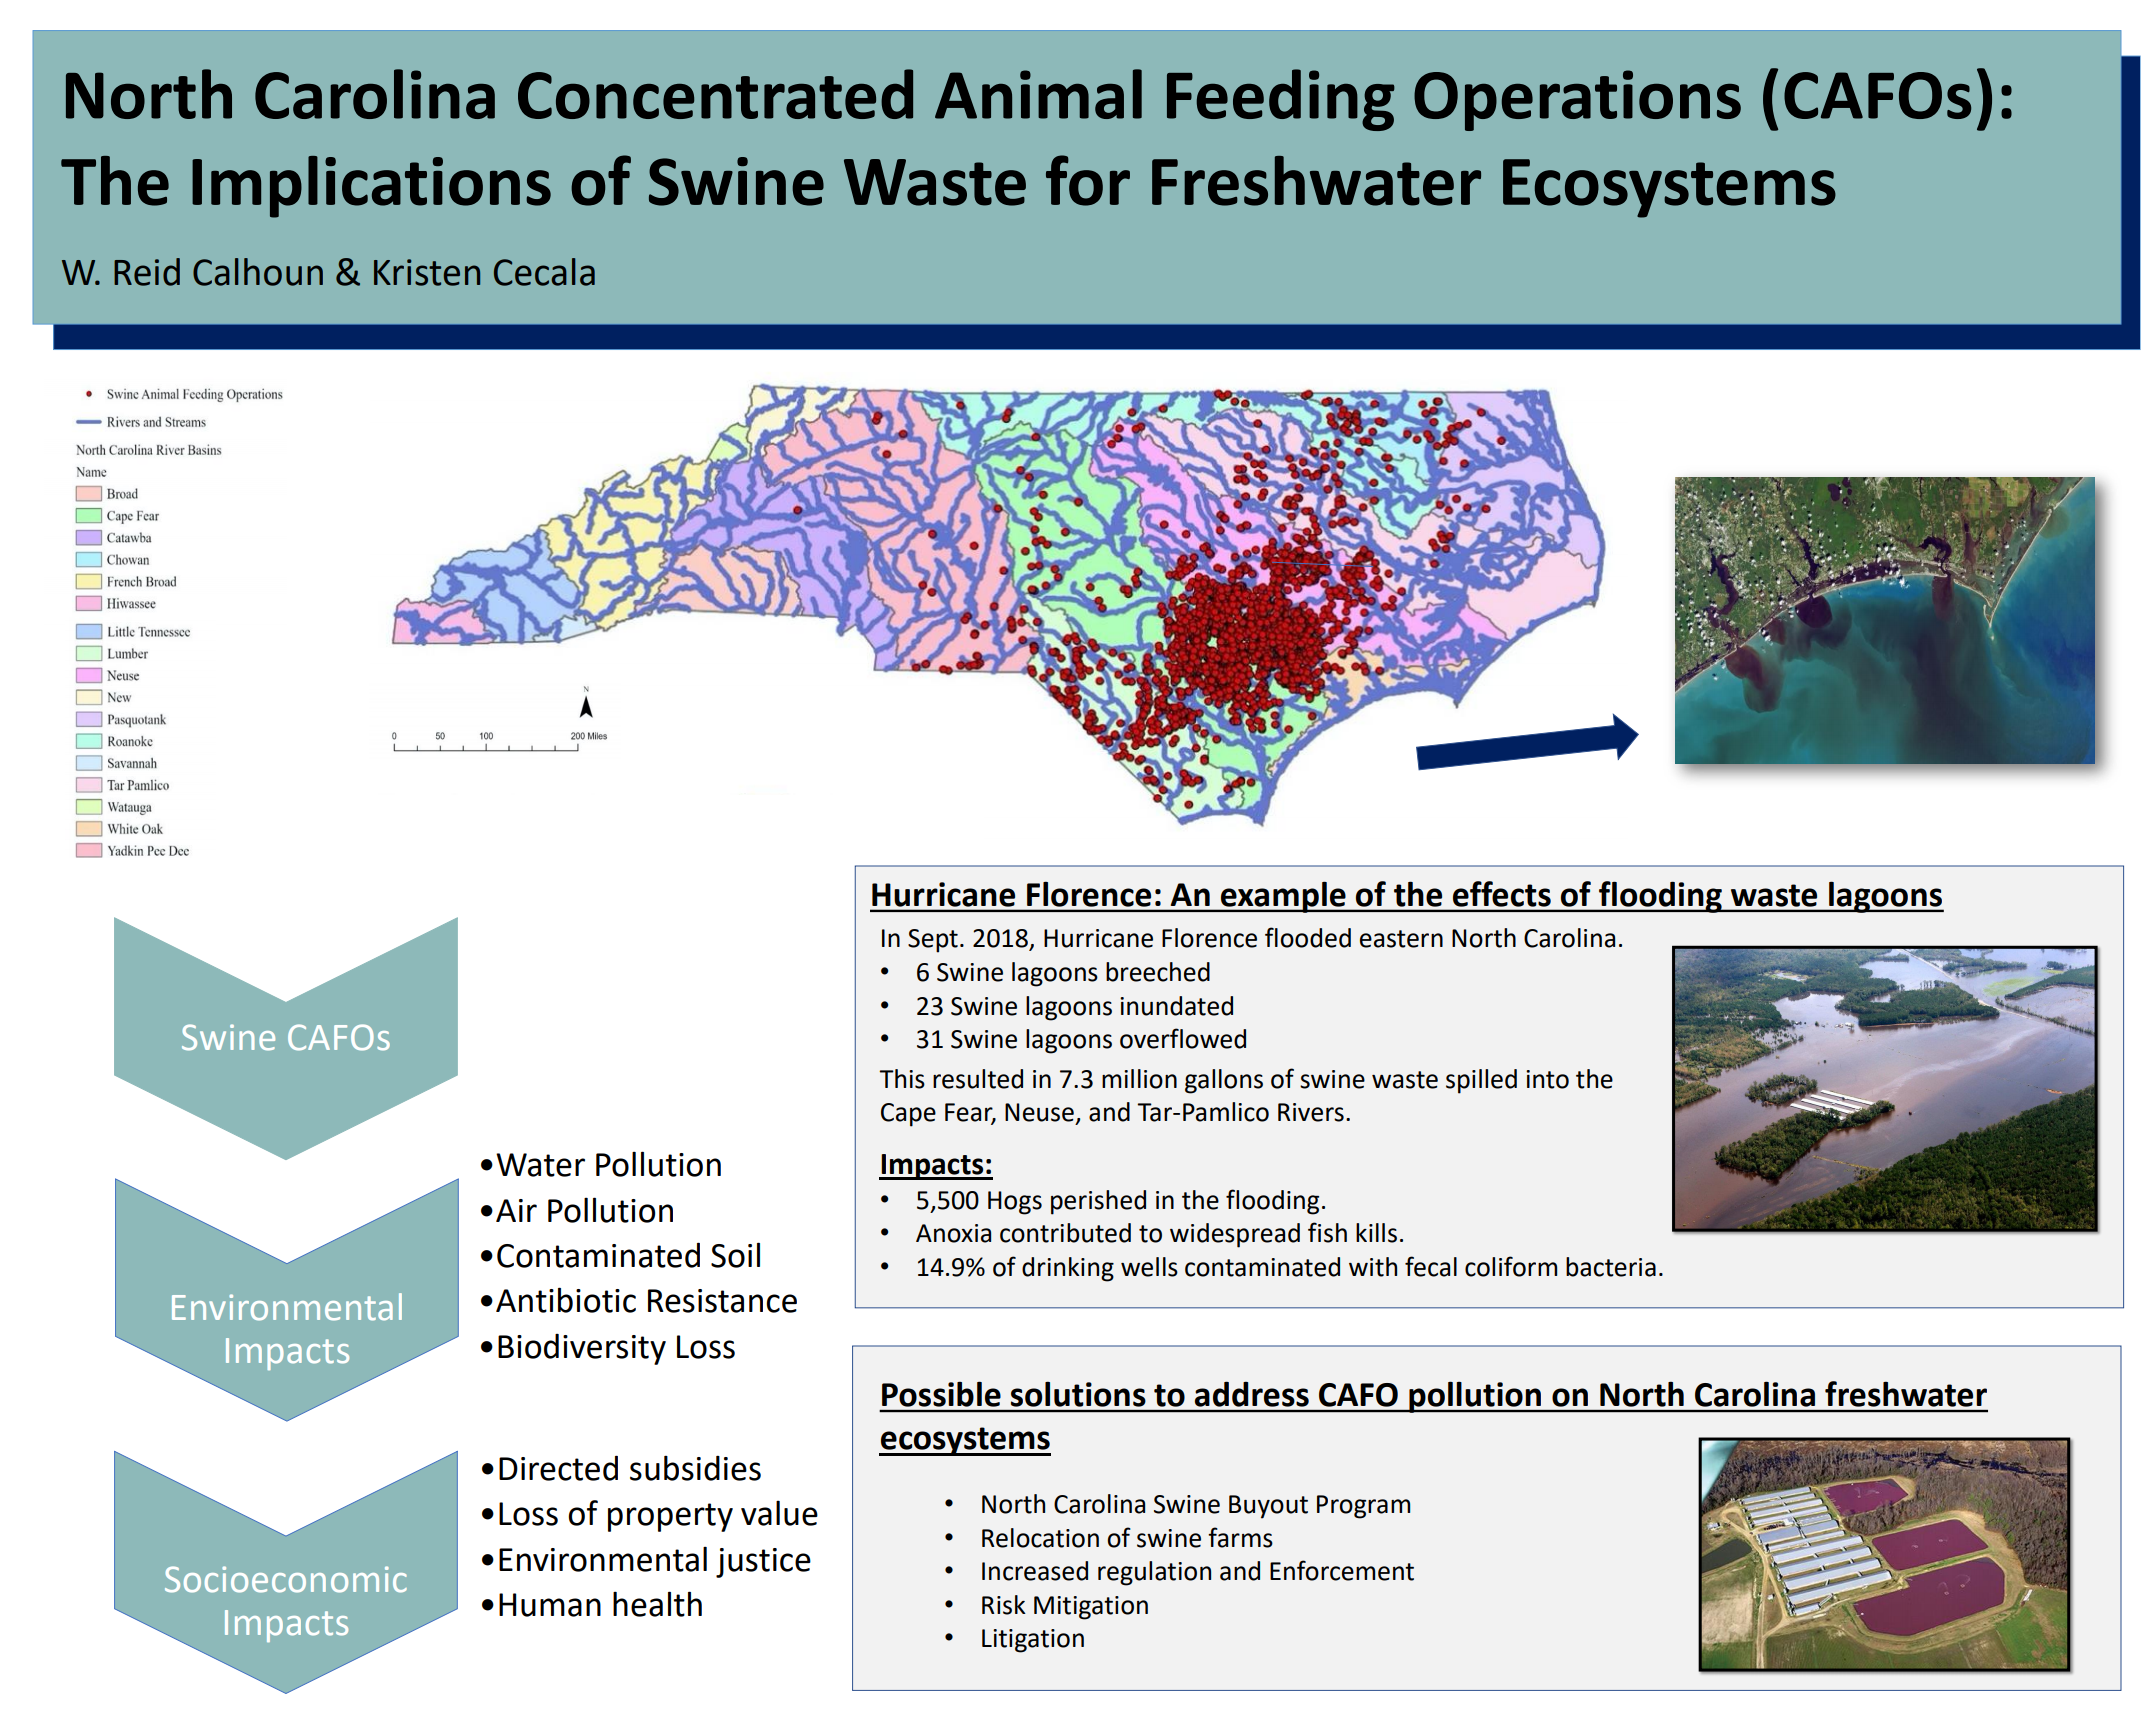 Showcase Image for North Carolina Concentrated Animal Feeding Operations (CAFOs): The Implications of Swine Waste for Freshwater Ecosystems